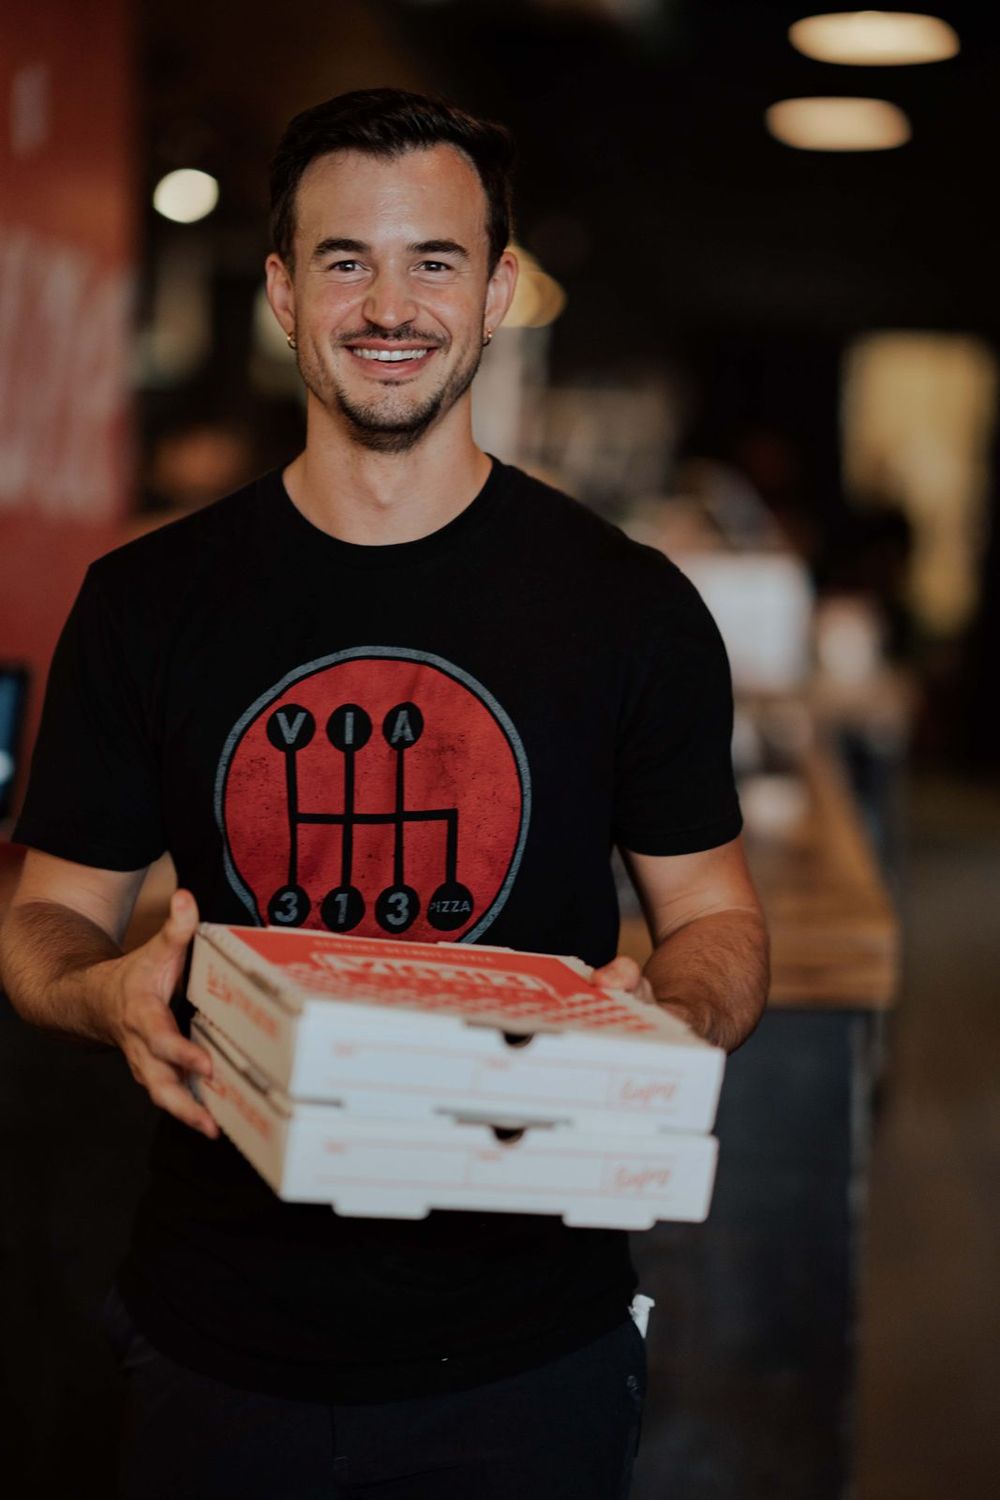 Via 313 Looking for Pizza Enthusiasts to Join Its Round Rock Team